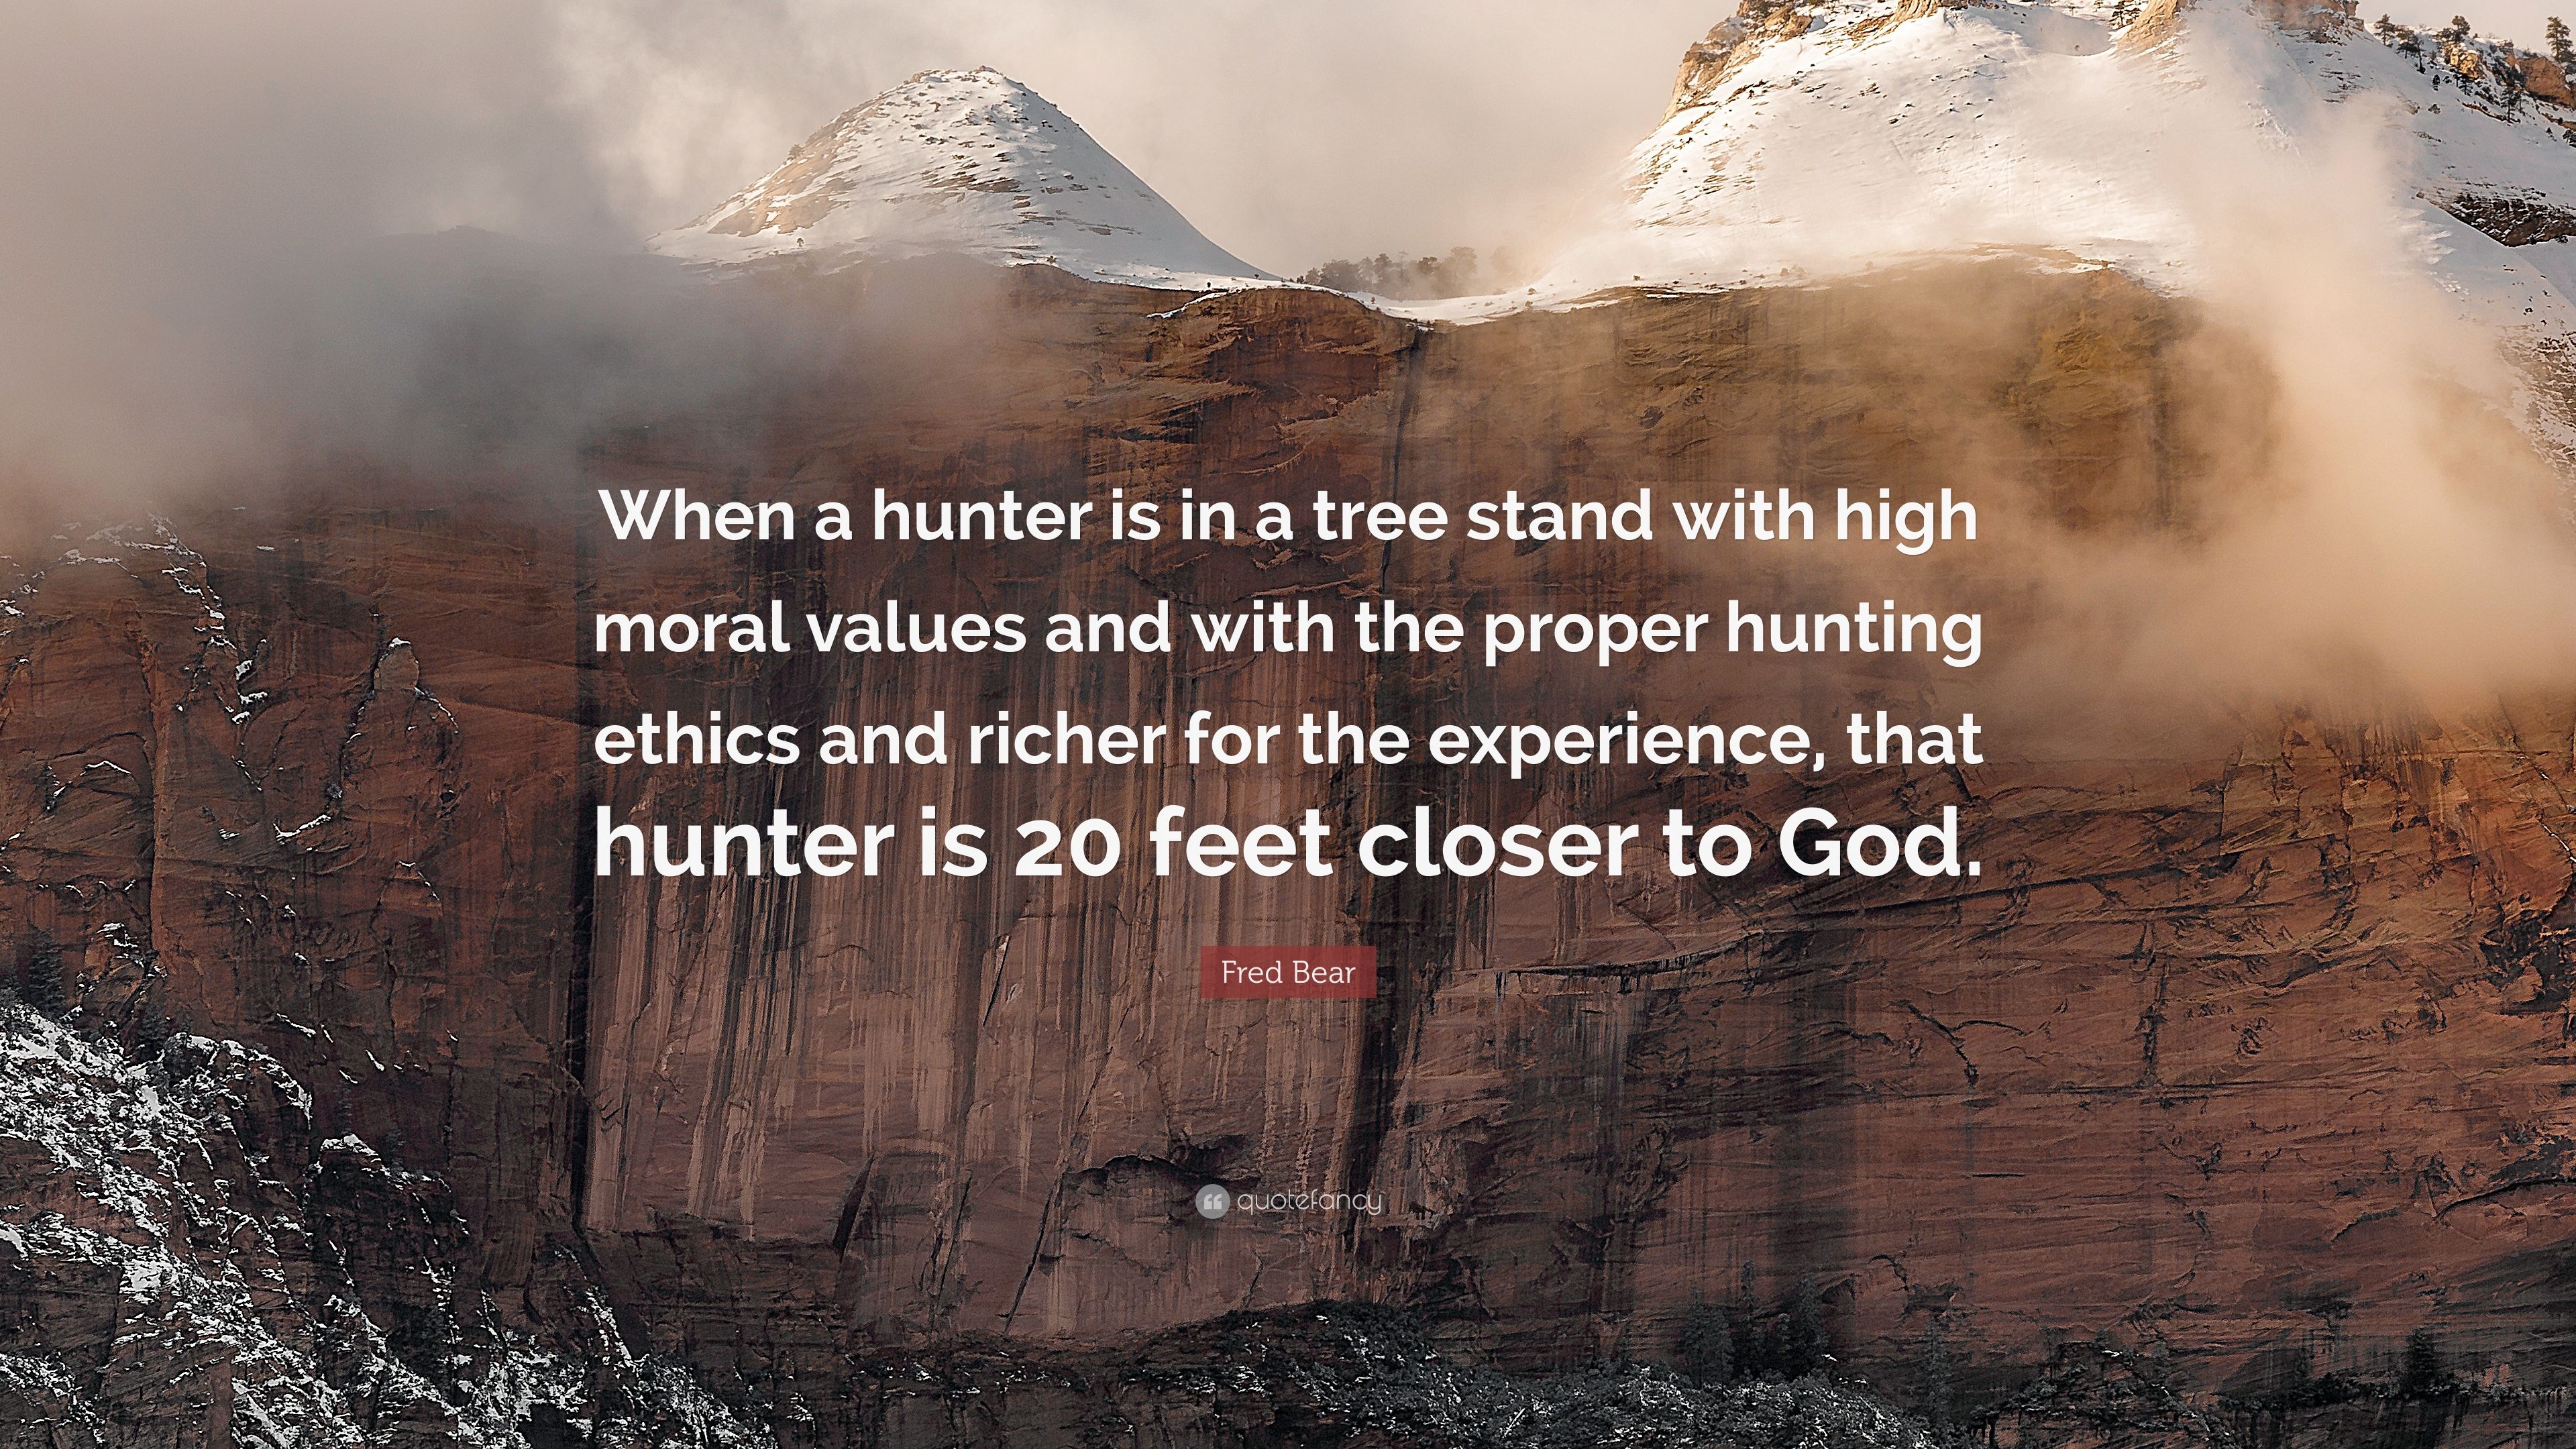 Fred Bear Quote: “When a hunter is in a tree stand with high moral